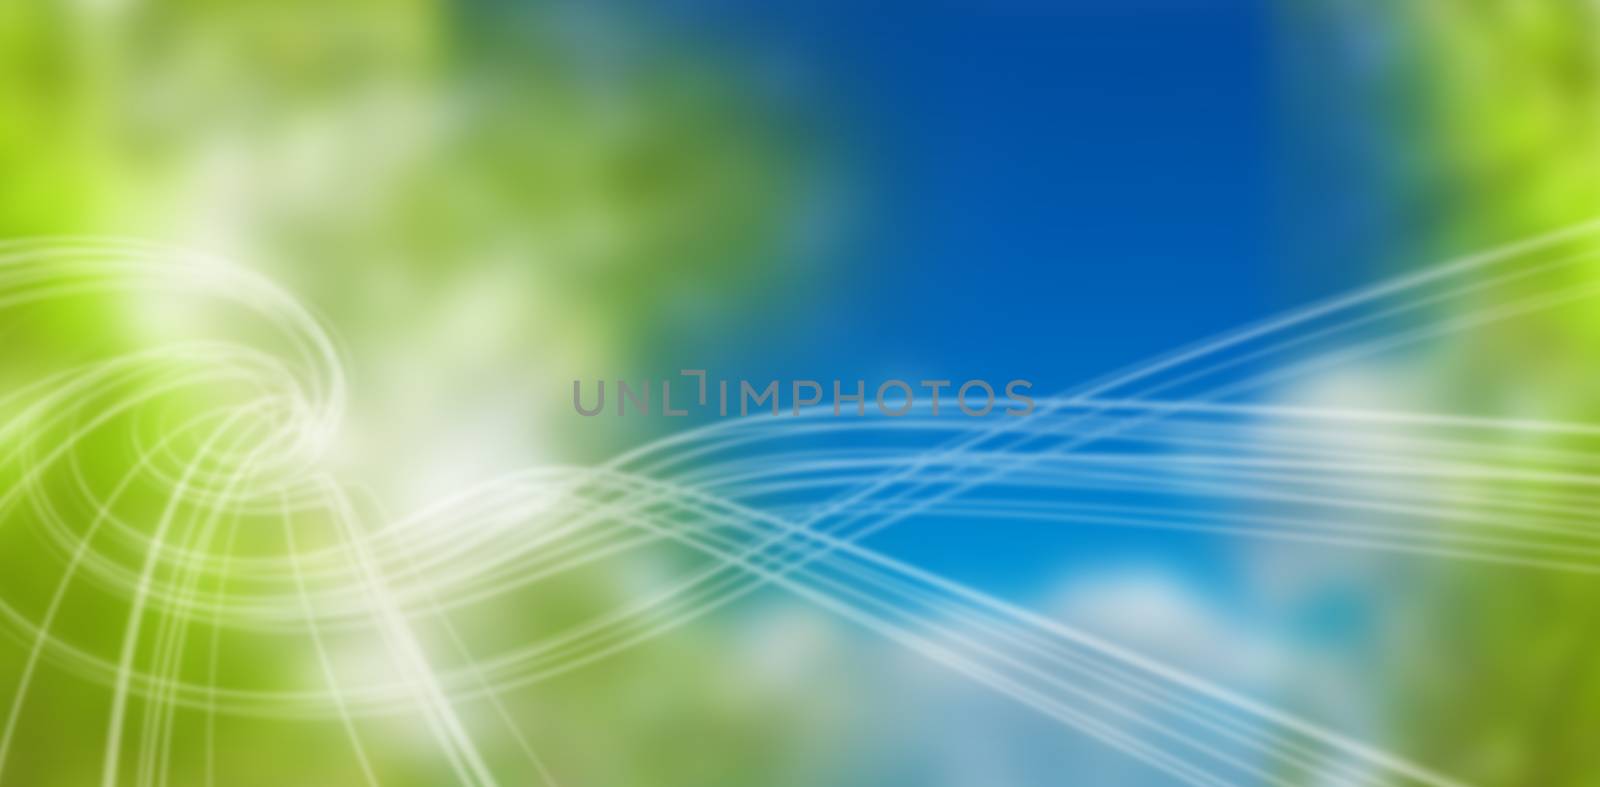 Composite image of blue and green background with shiny lines by Wavebreakmedia